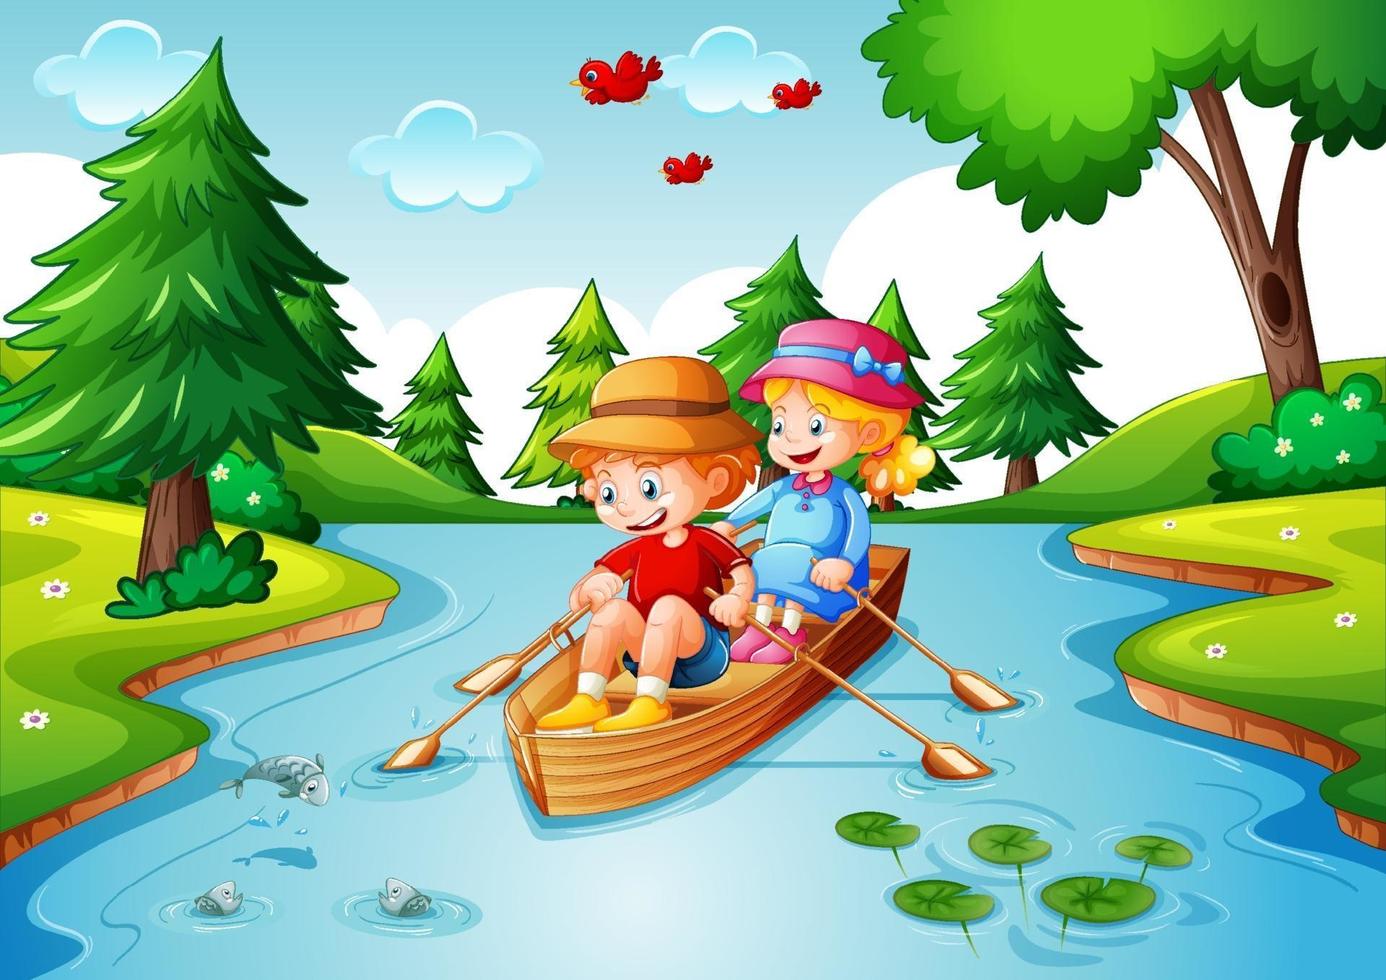 Children row the boat in the stream forest scene vector